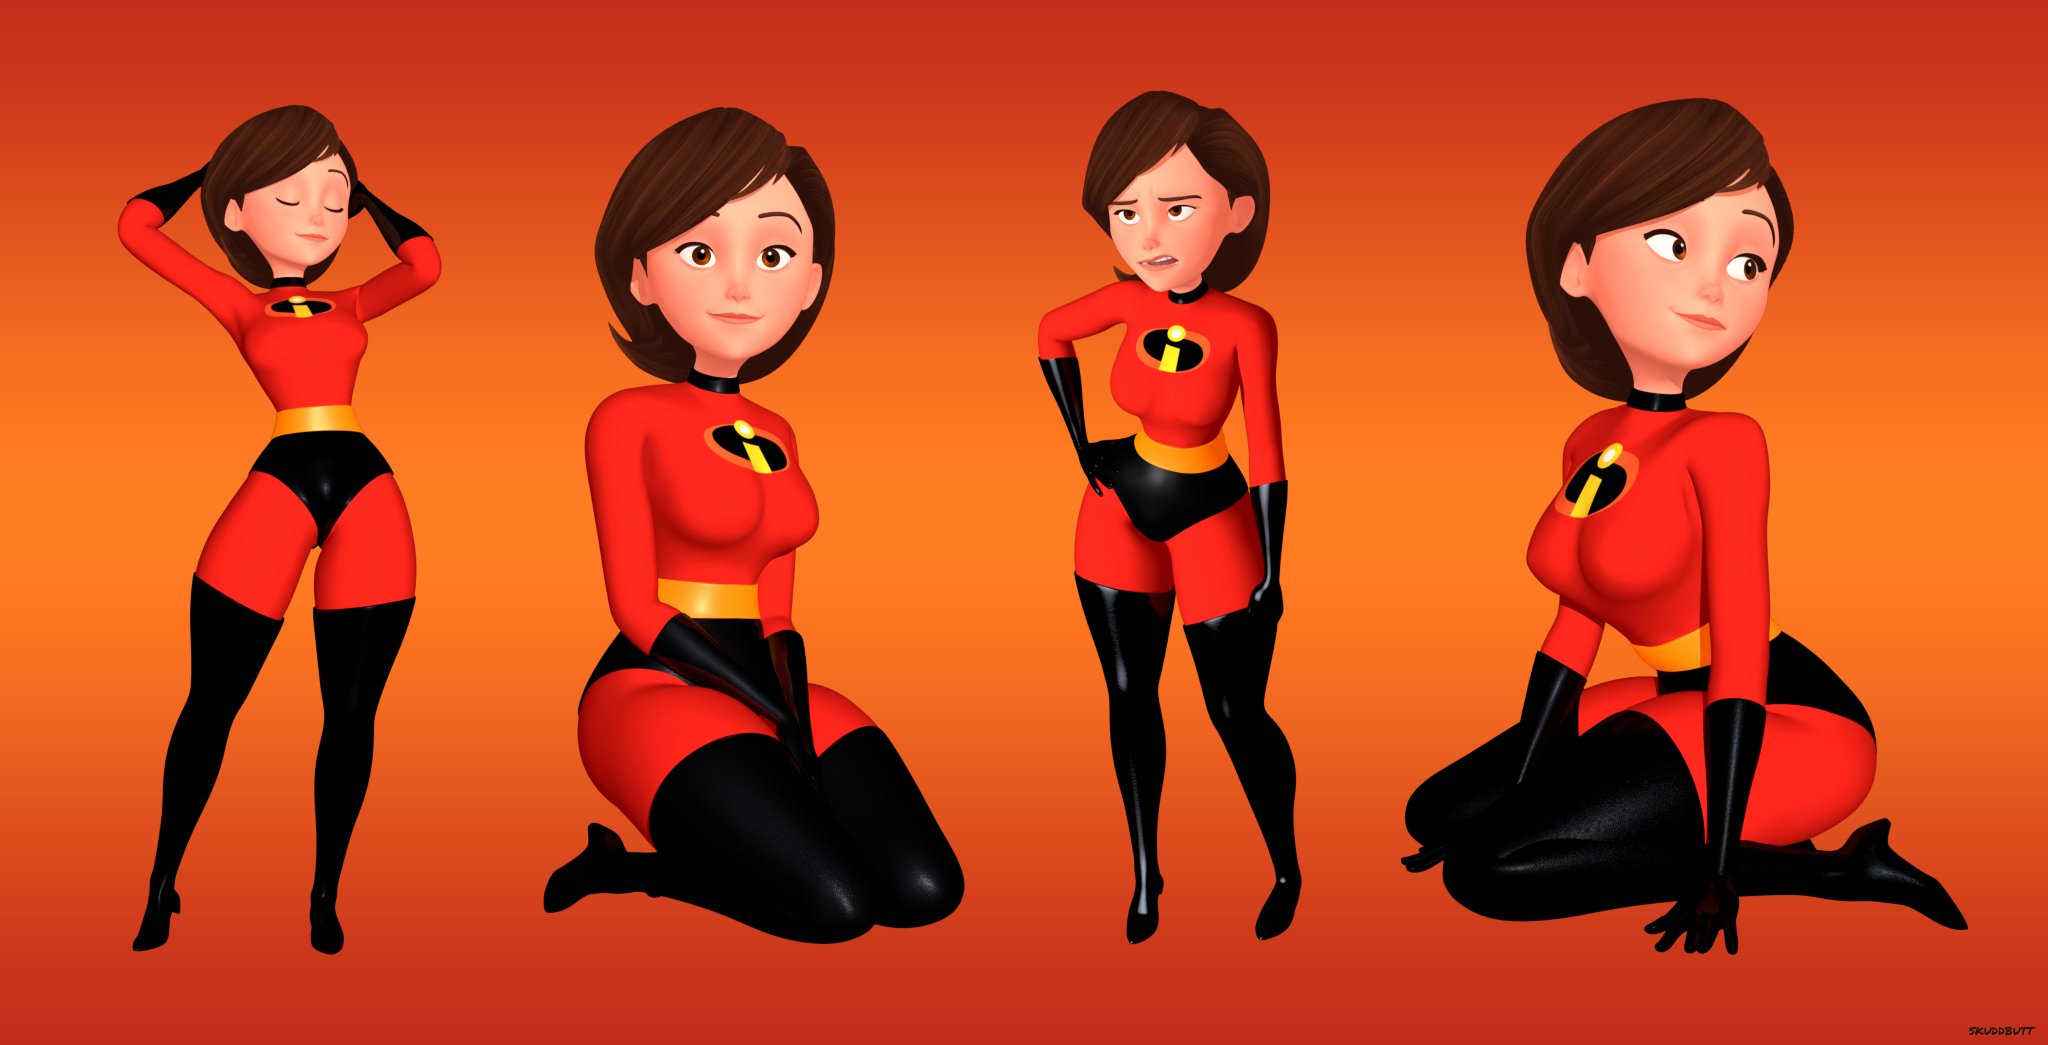 Official Digitalero View Topic The Incredibles Helen Parr